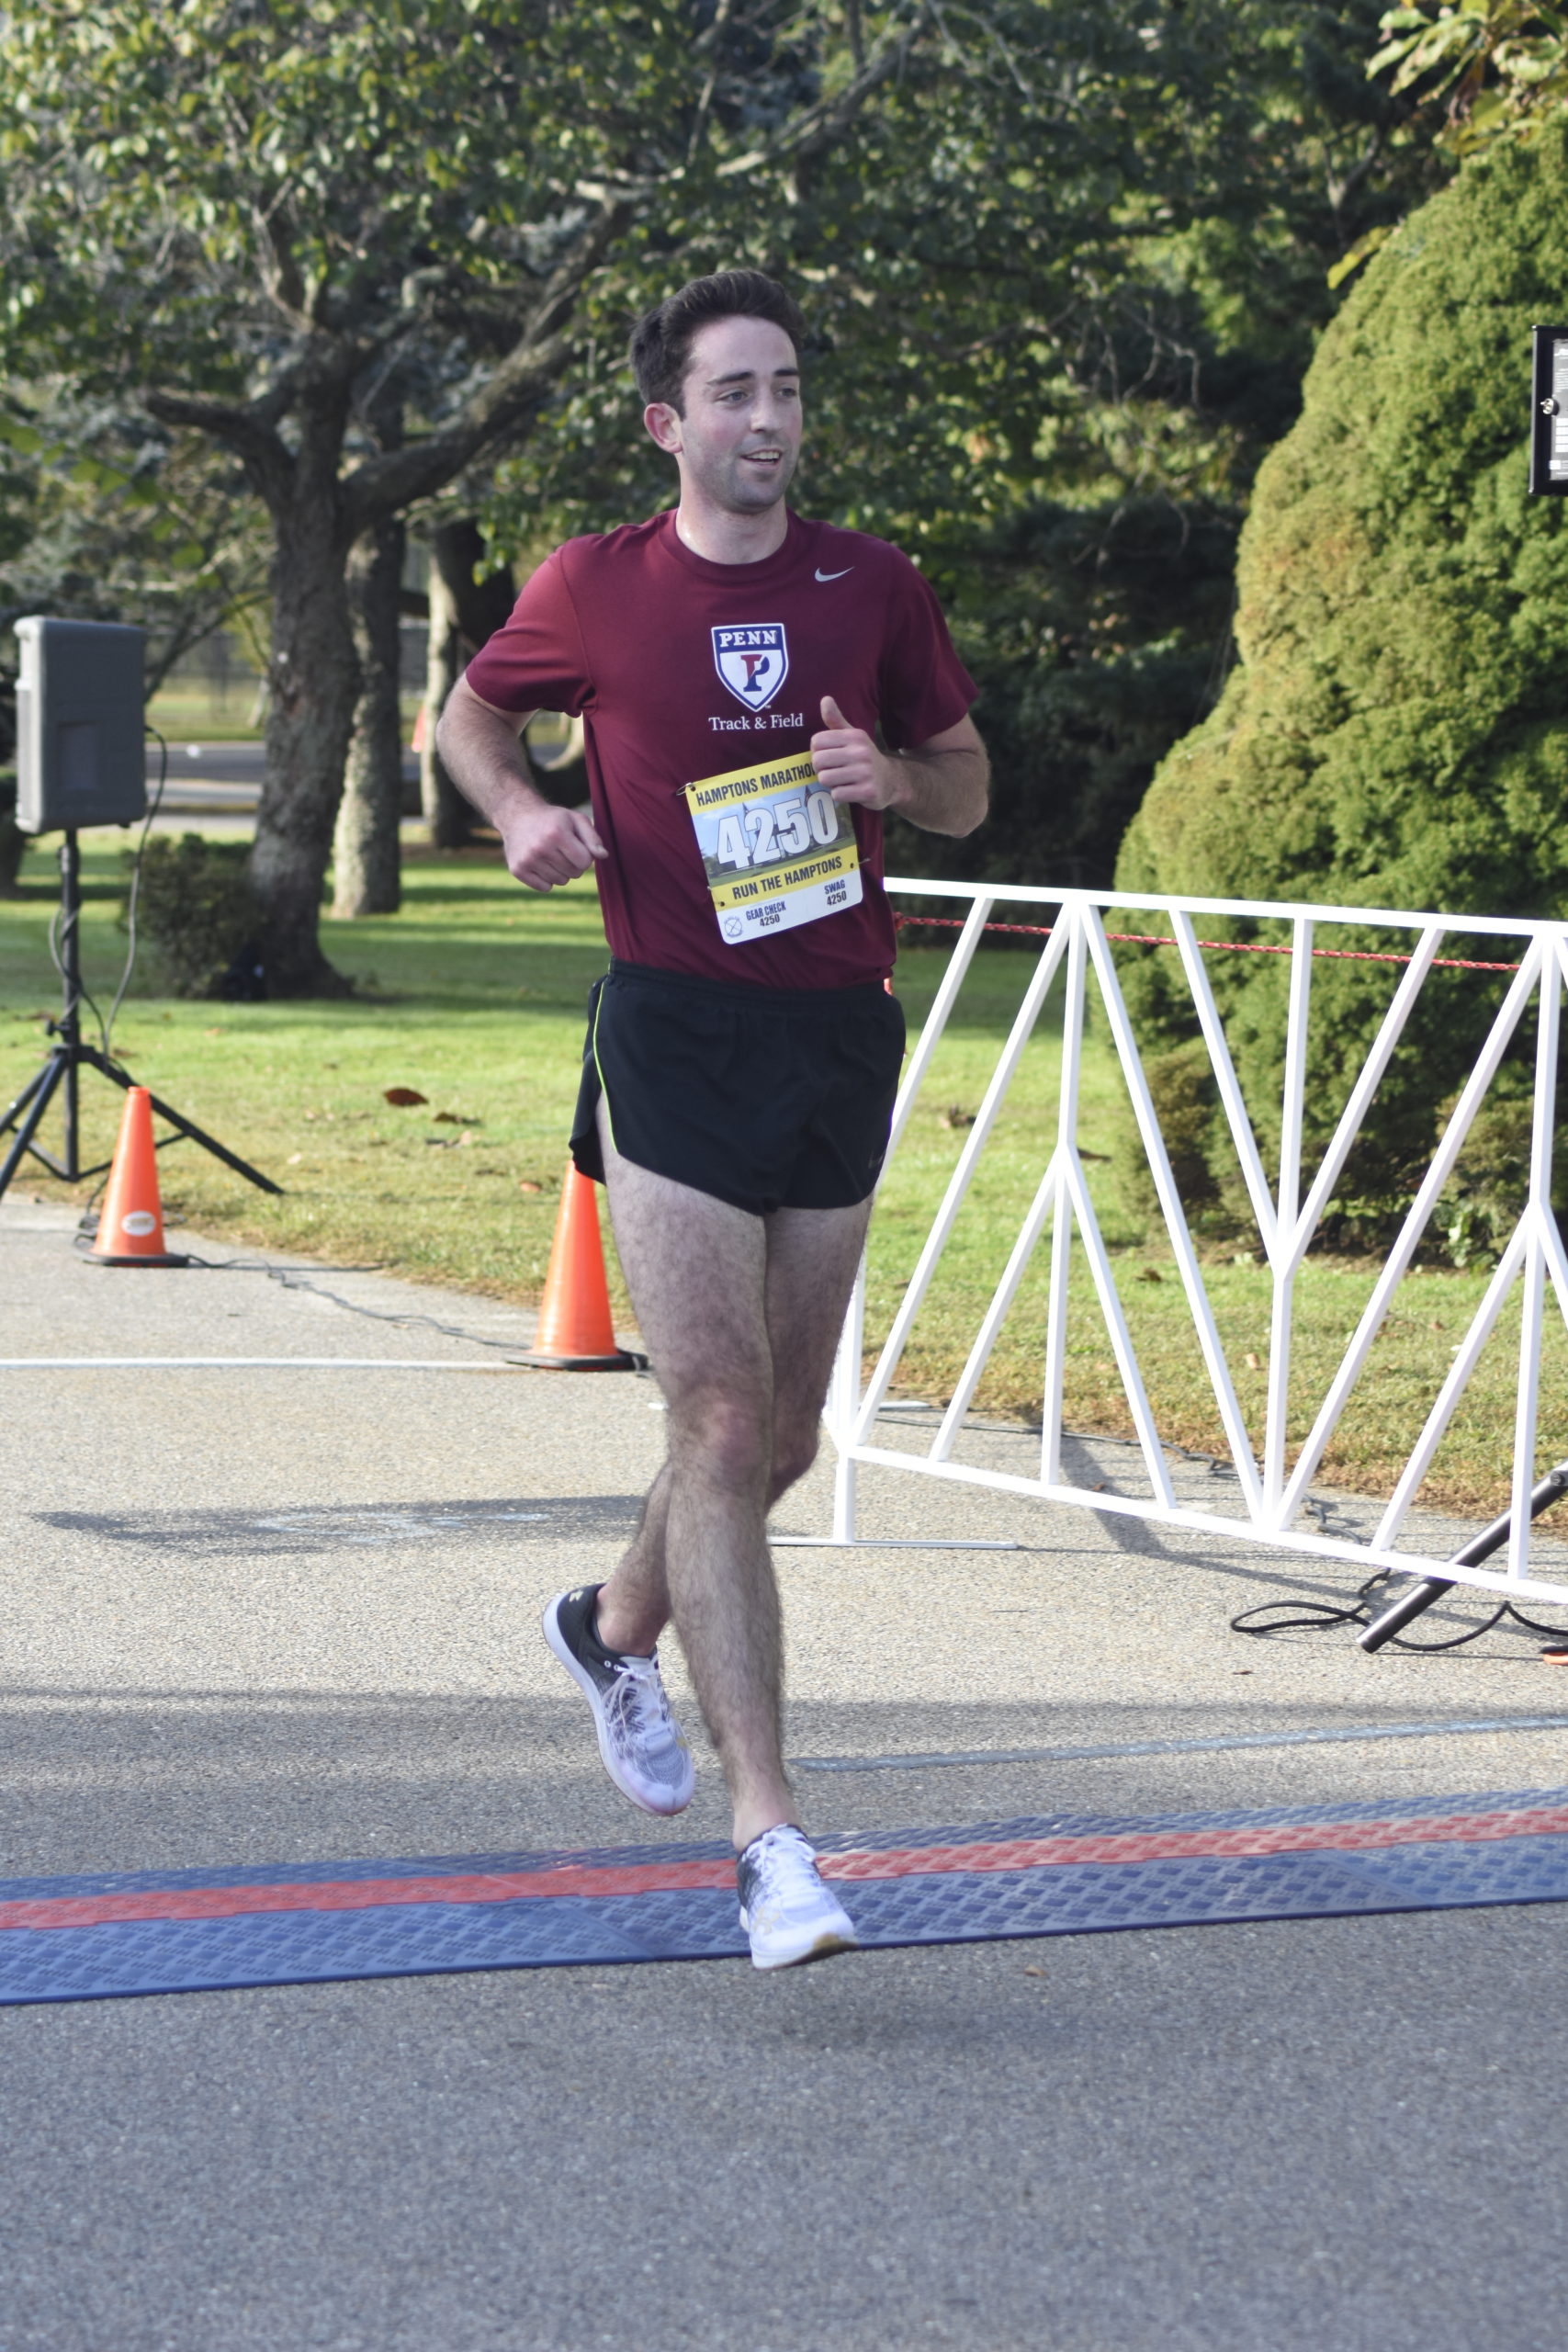 Colin Daly of River Bridge, New Jersey, won the 5K race.